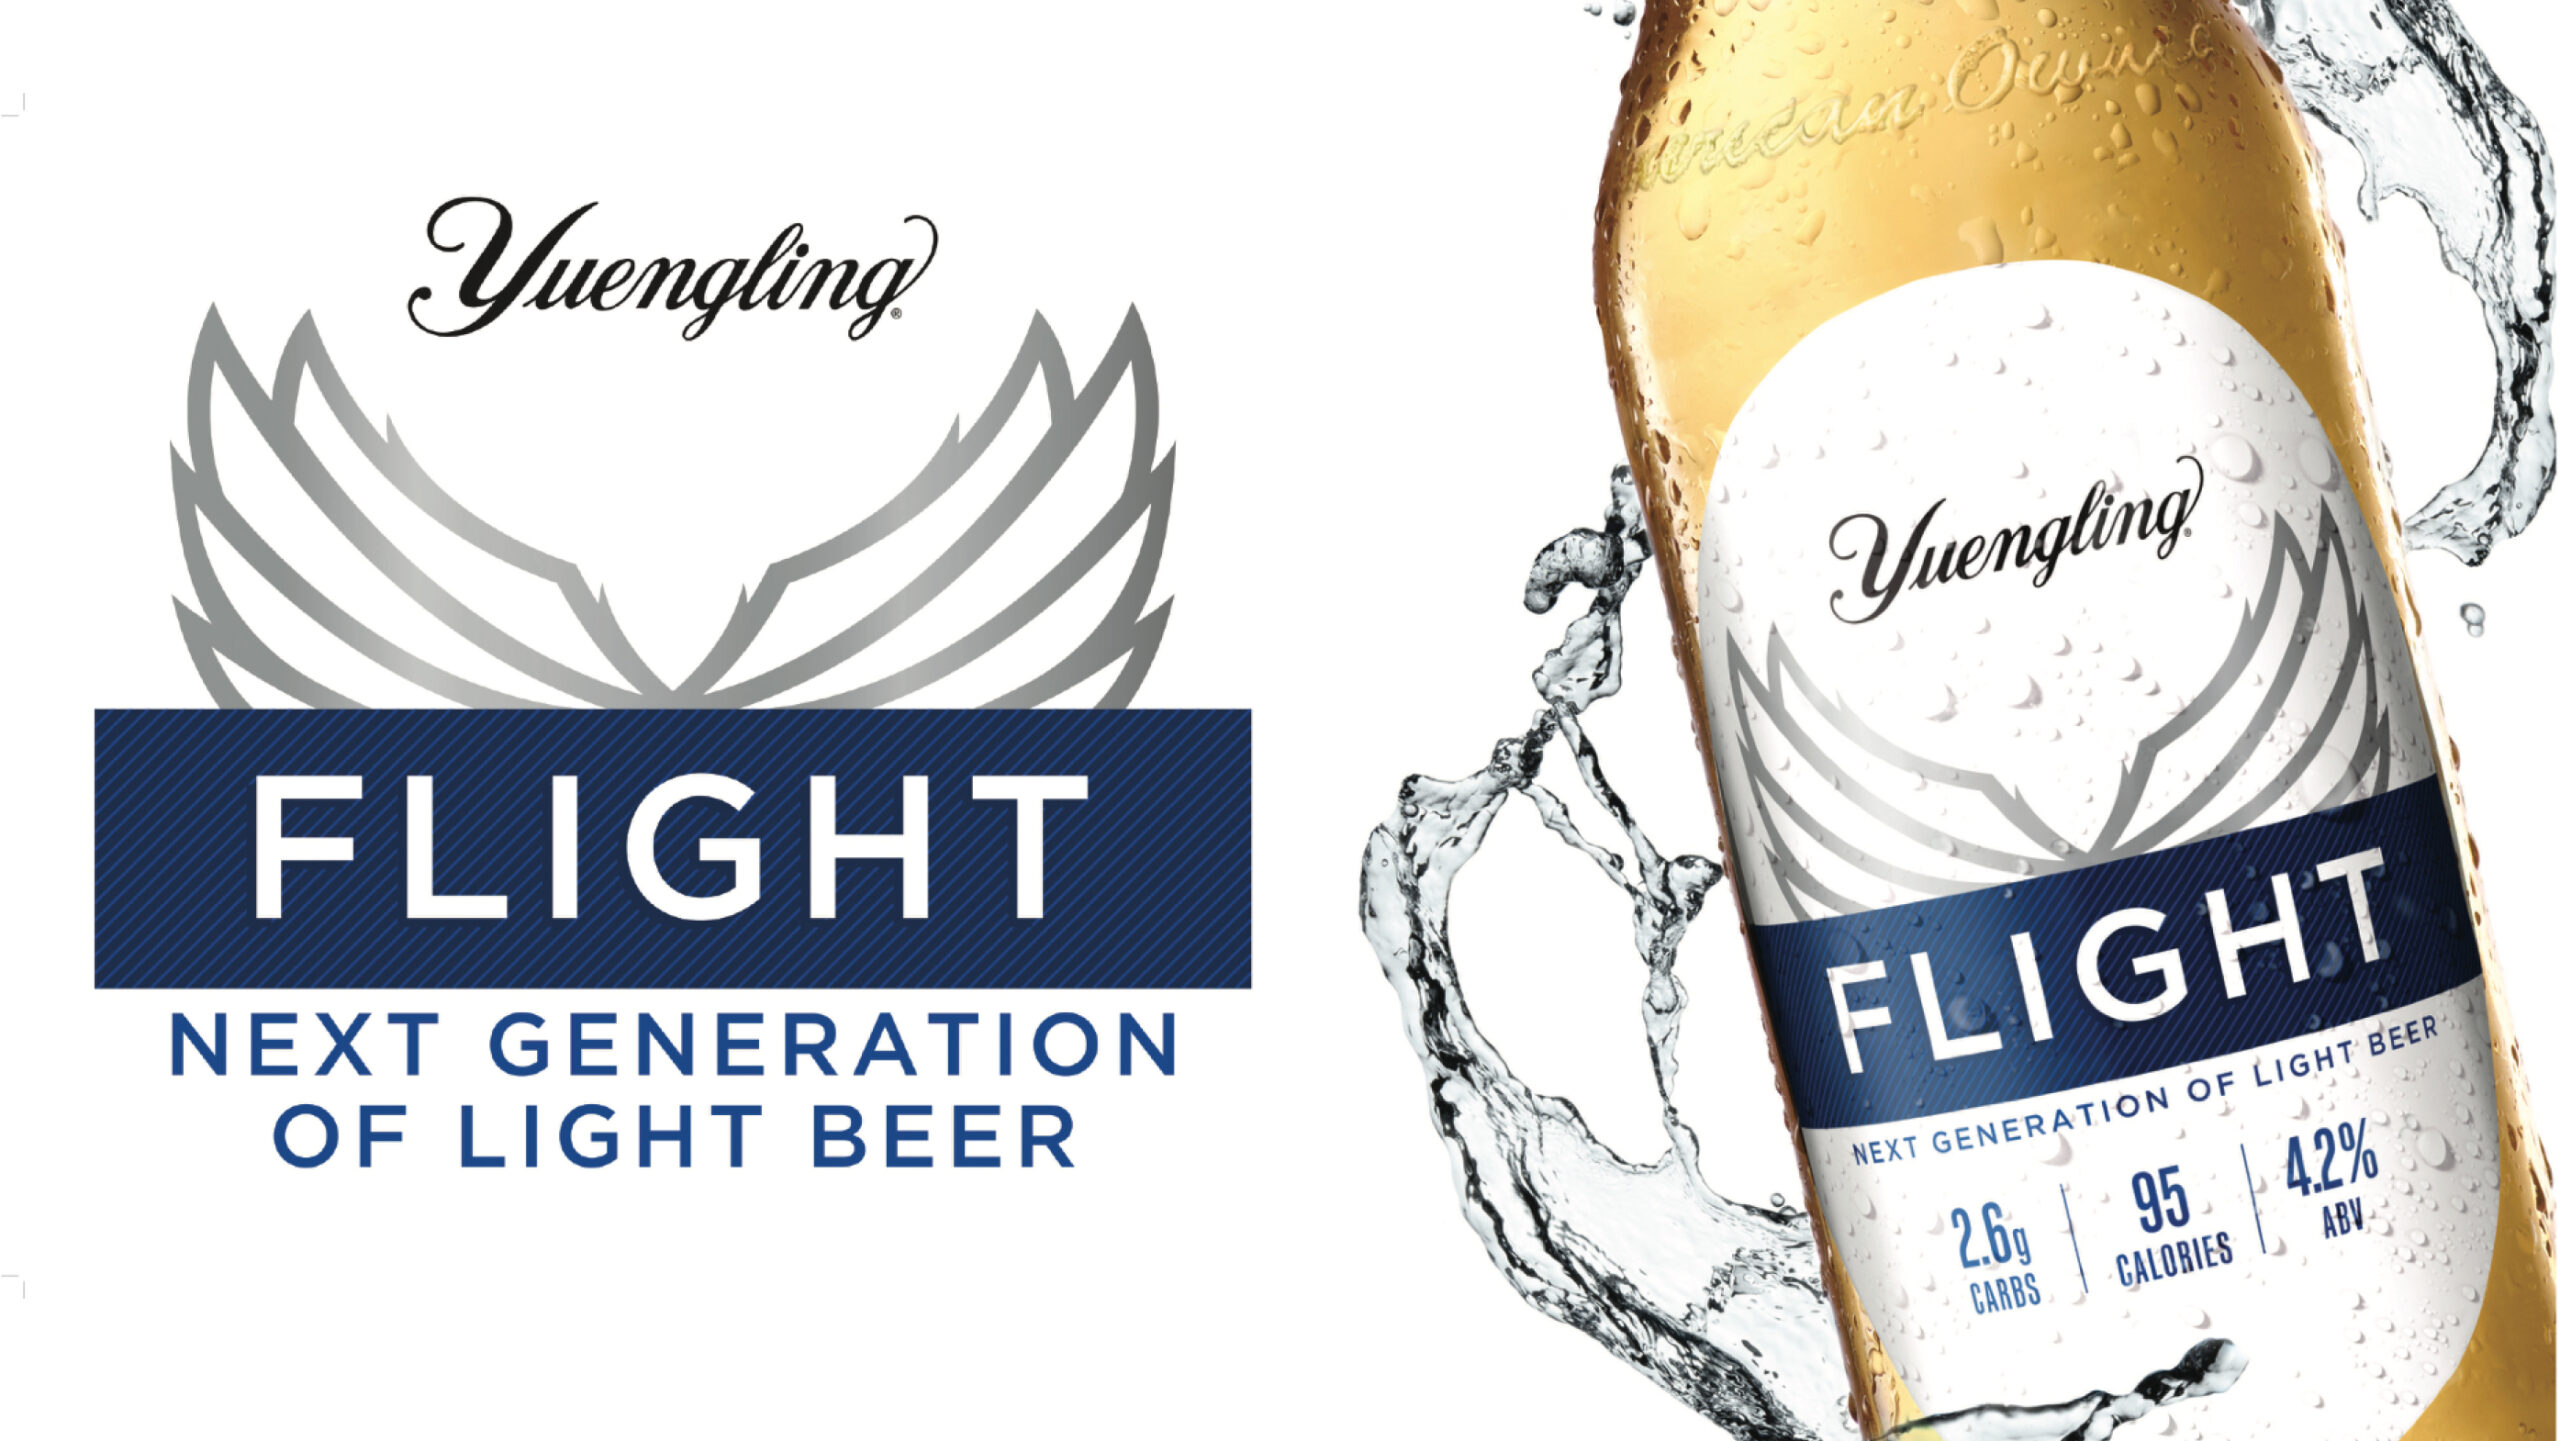 bailey-brand-consulting-yuengling-full-width-flight-next-generation-of-light-beer-packaging